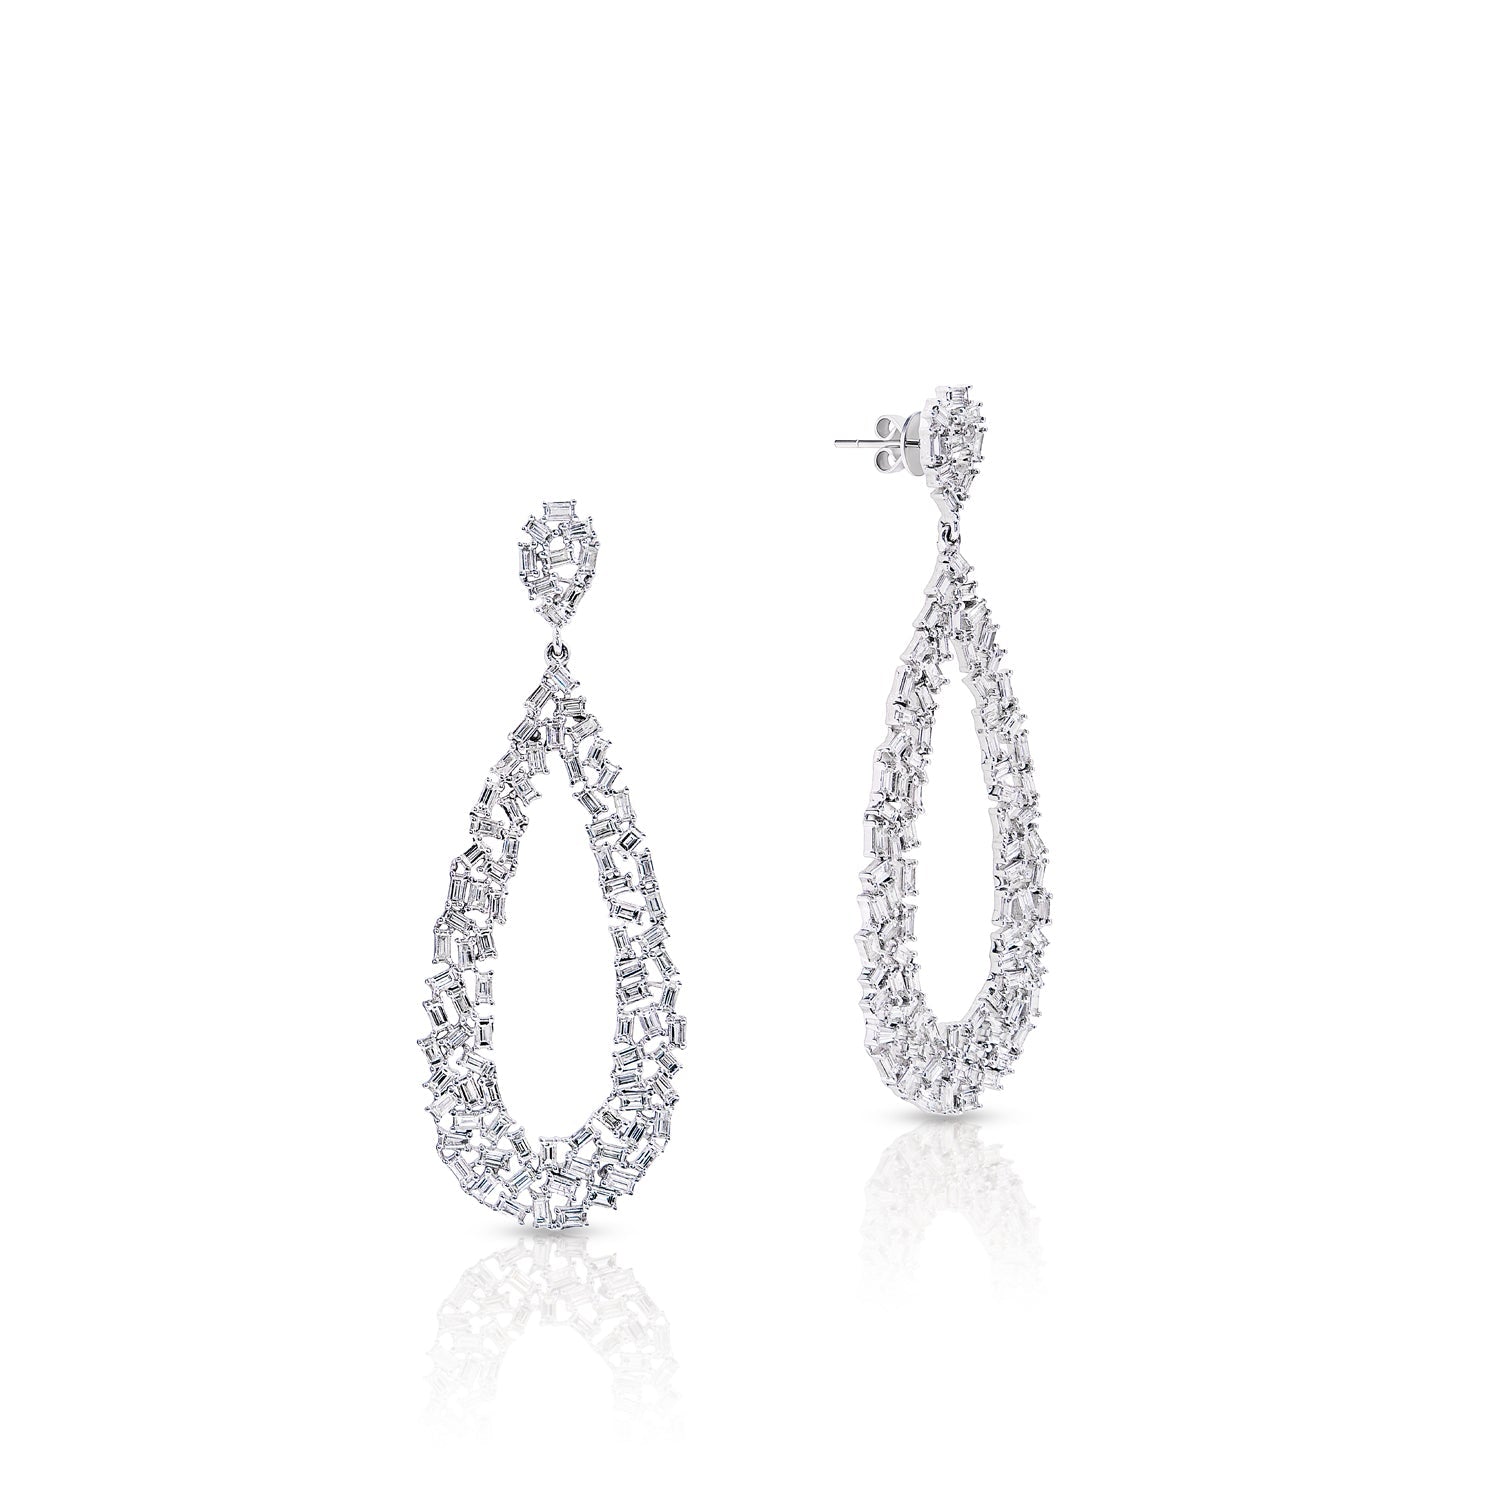 Mya 5 Carat Combine Mix Shape Diamond Hanging Earrings in 14k White Gold Front and Side View